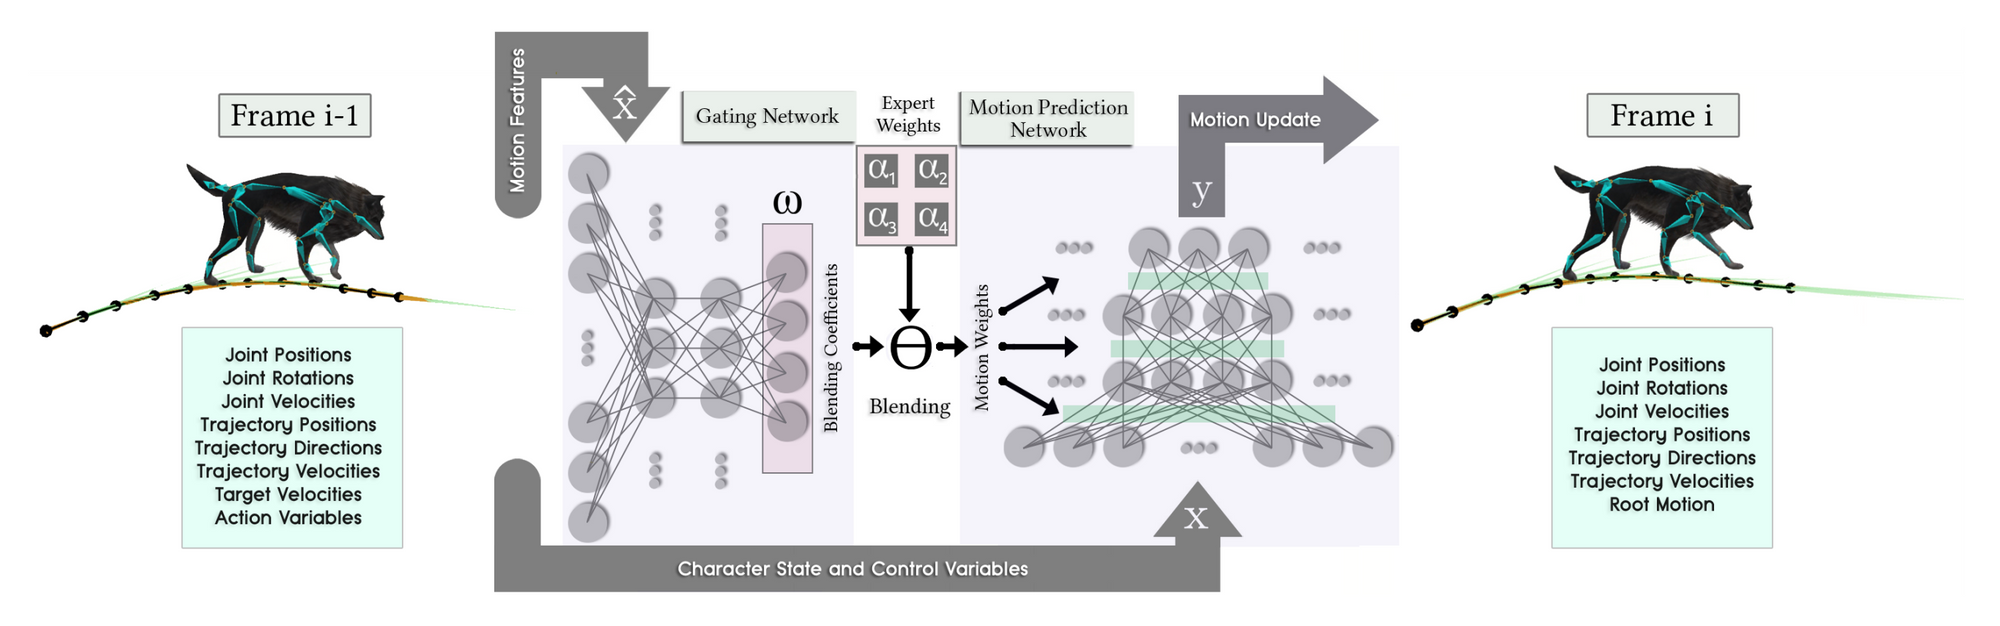 Paper Insight: Generating Motion with Neural Networks & Motion Capture